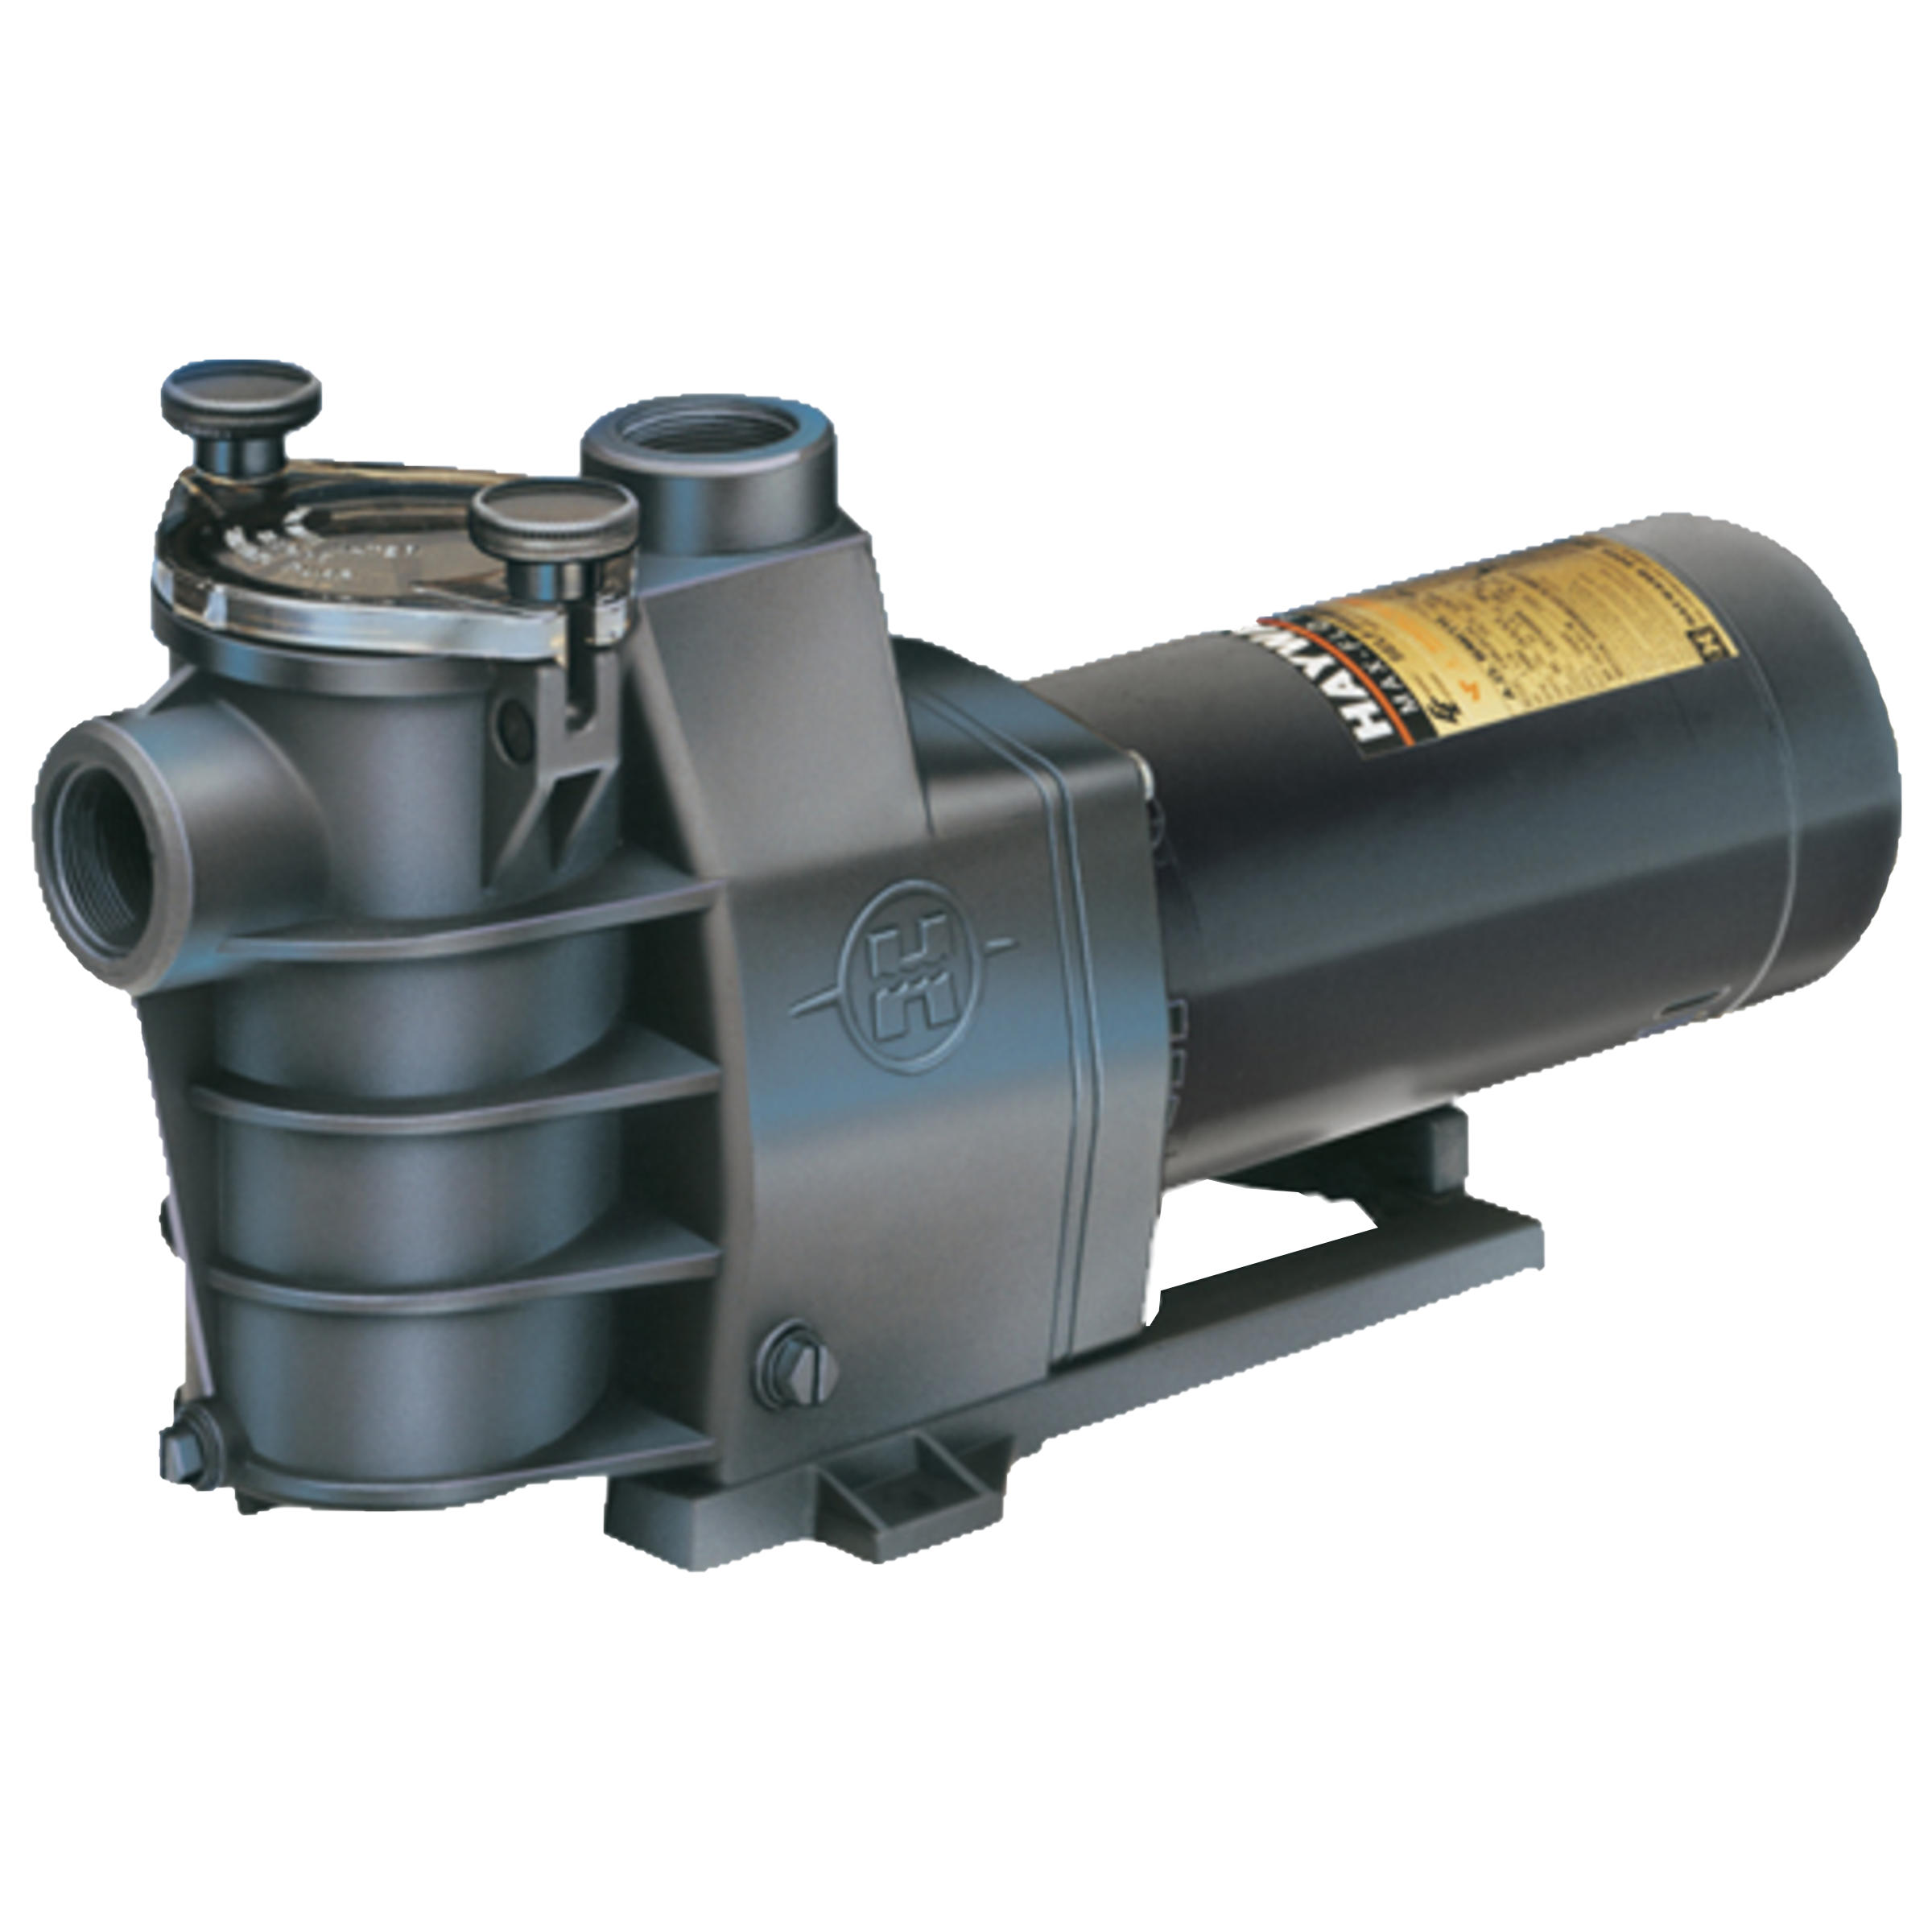 SP2807X10W Hayward Inground 1 HP MaxFlo Pump for In-Ground Pools or In-Ground Spas of all Types and sizes, Total H.P. 1.1, Service Factor 1.25